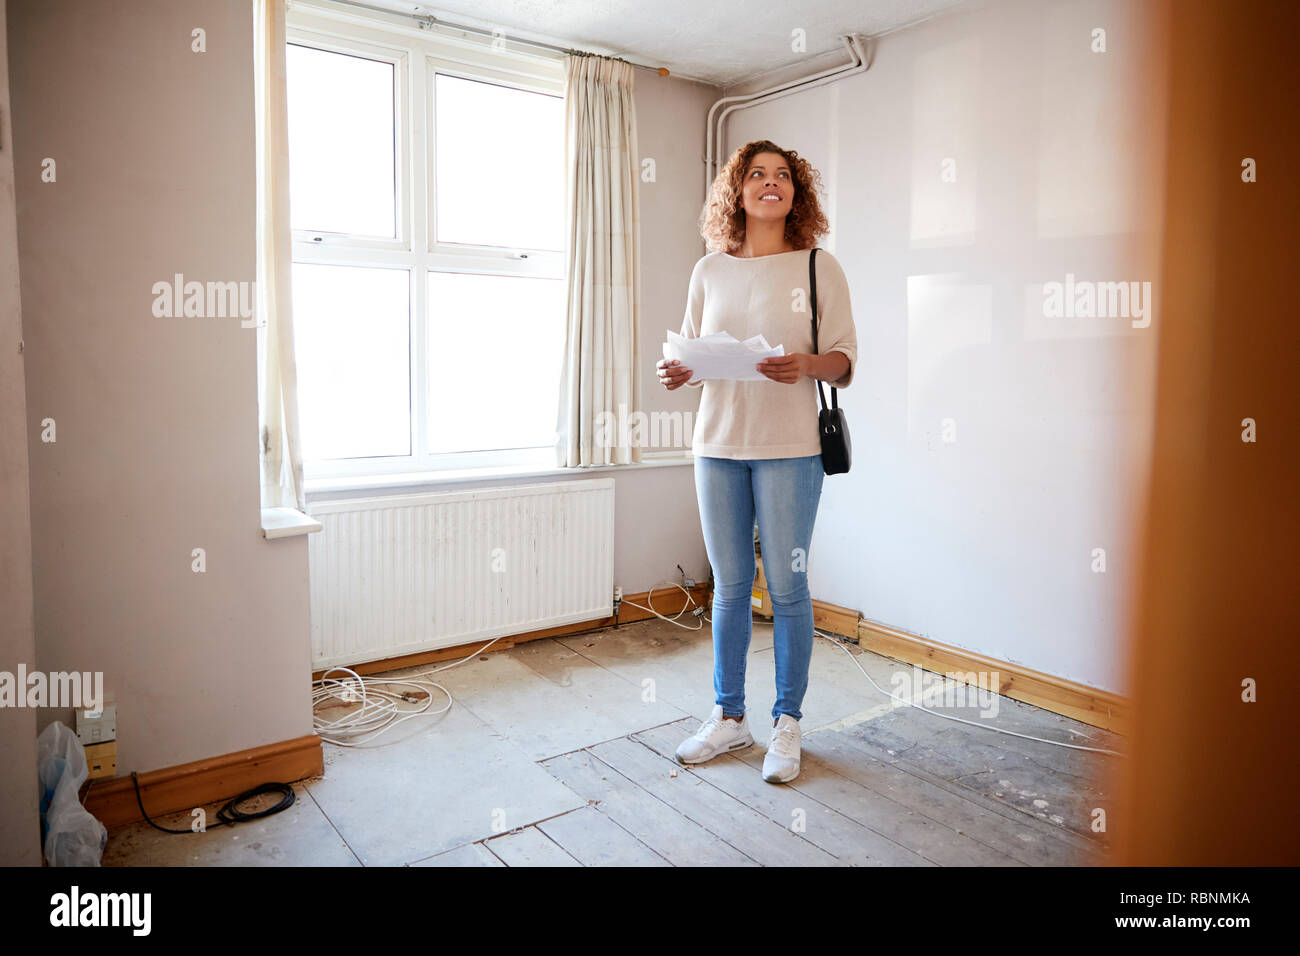 Female First Time Buyer Looking At House Survey In Room To Be Renovated Stock Photo